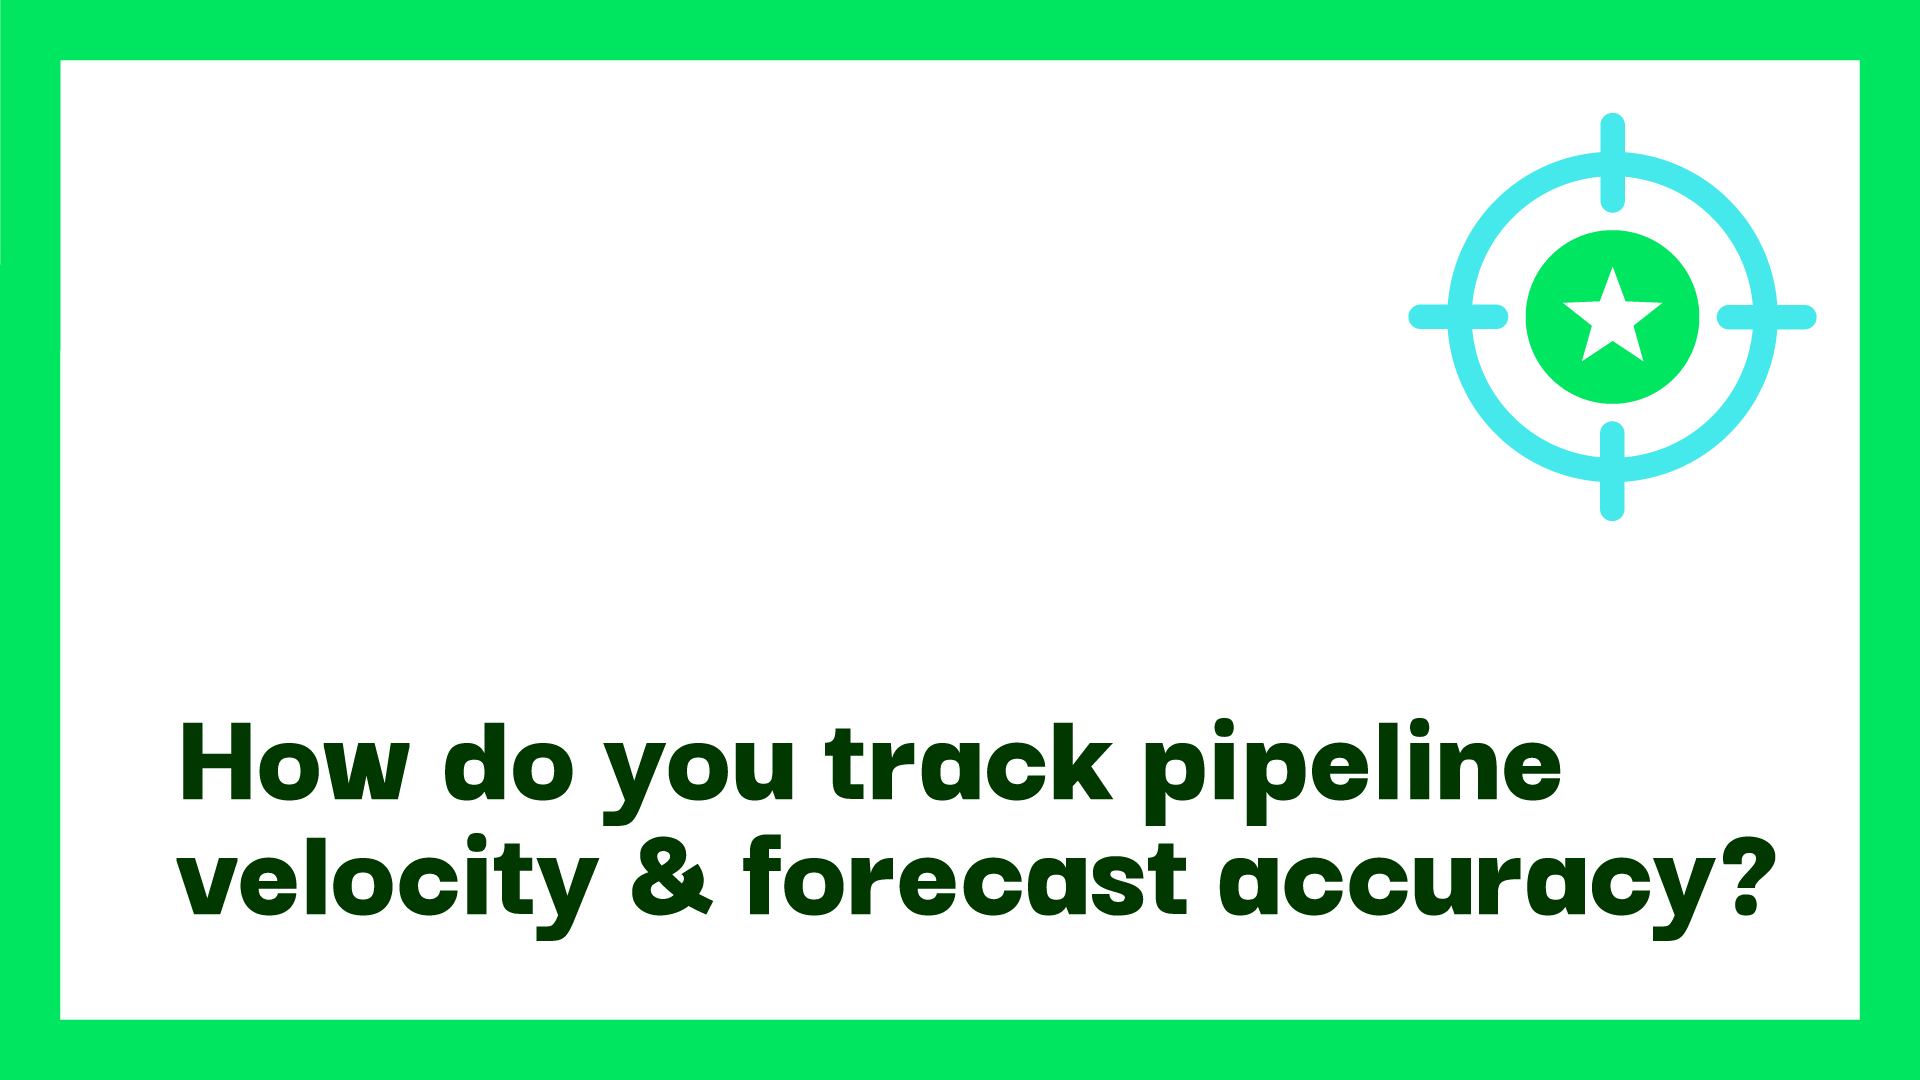 How to track pipeline velocity & forecast accuracy?